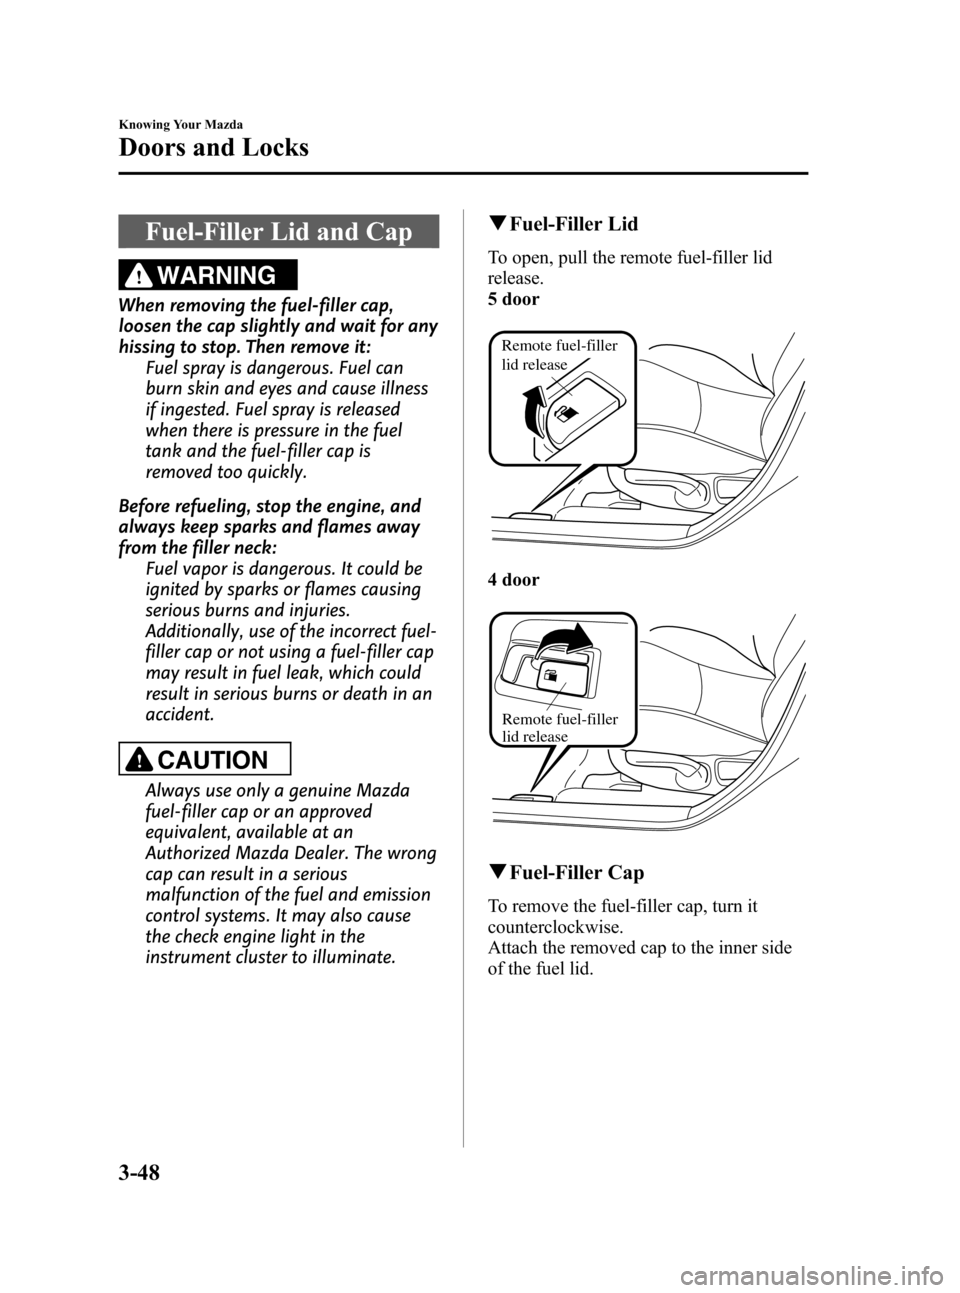 MAZDA MODEL 3 HATCHBACK 2012  Owners Manual (in English) Black plate (126,1)
Fuel-Filler Lid and Cap
WARNING
When removing the fuel-filler cap,
loosen the cap slightly and wait for any
hissing to stop. Then remove it:Fuel spray is dangerous. Fuel can
burn s